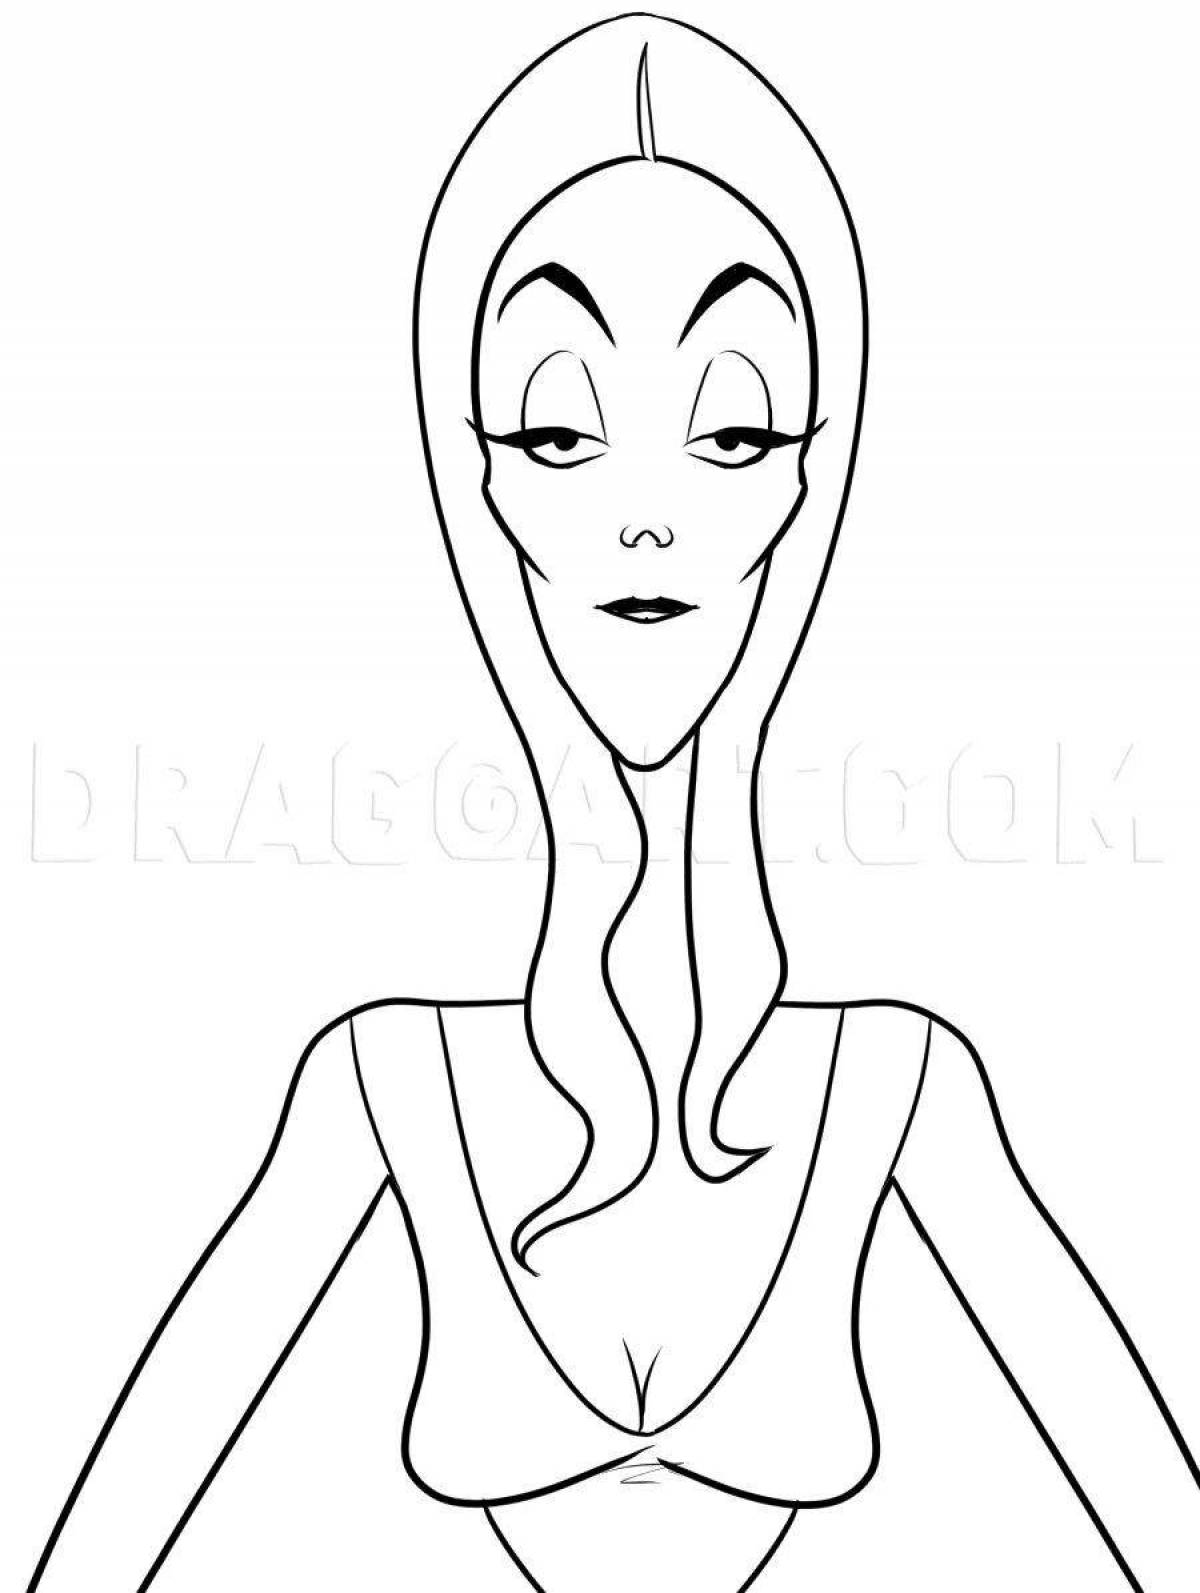 Colorful martish coloring page